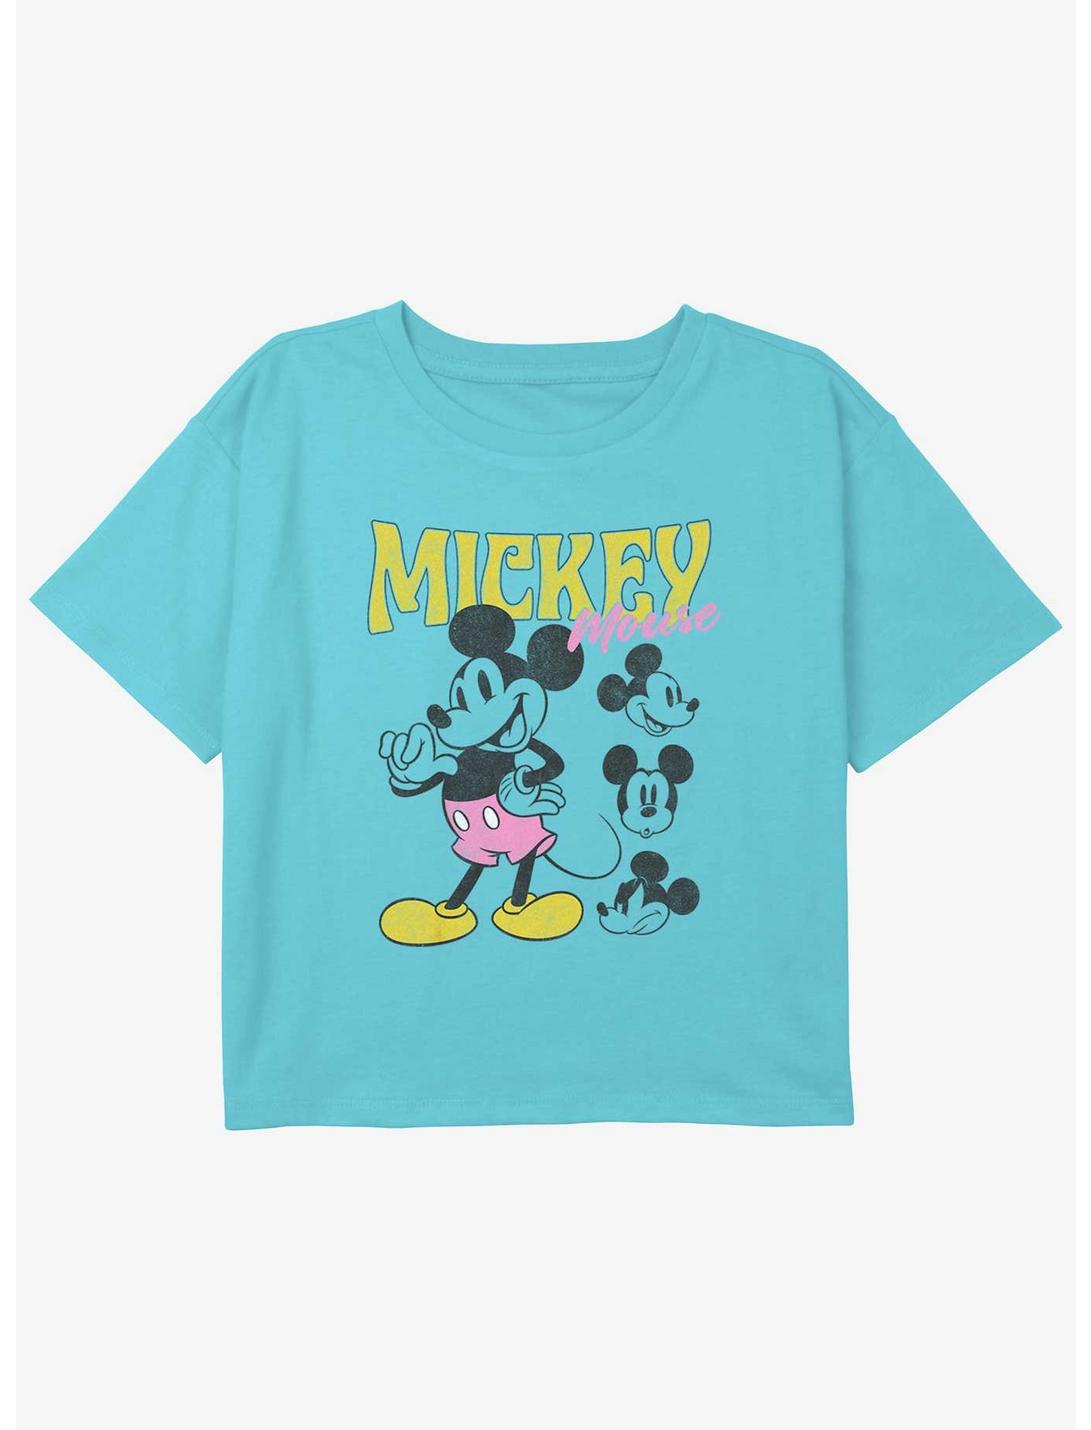 Disney Mickey Mouse Mickey Poses Girls Youth Crop T-Shirt, BLUE, hi-res